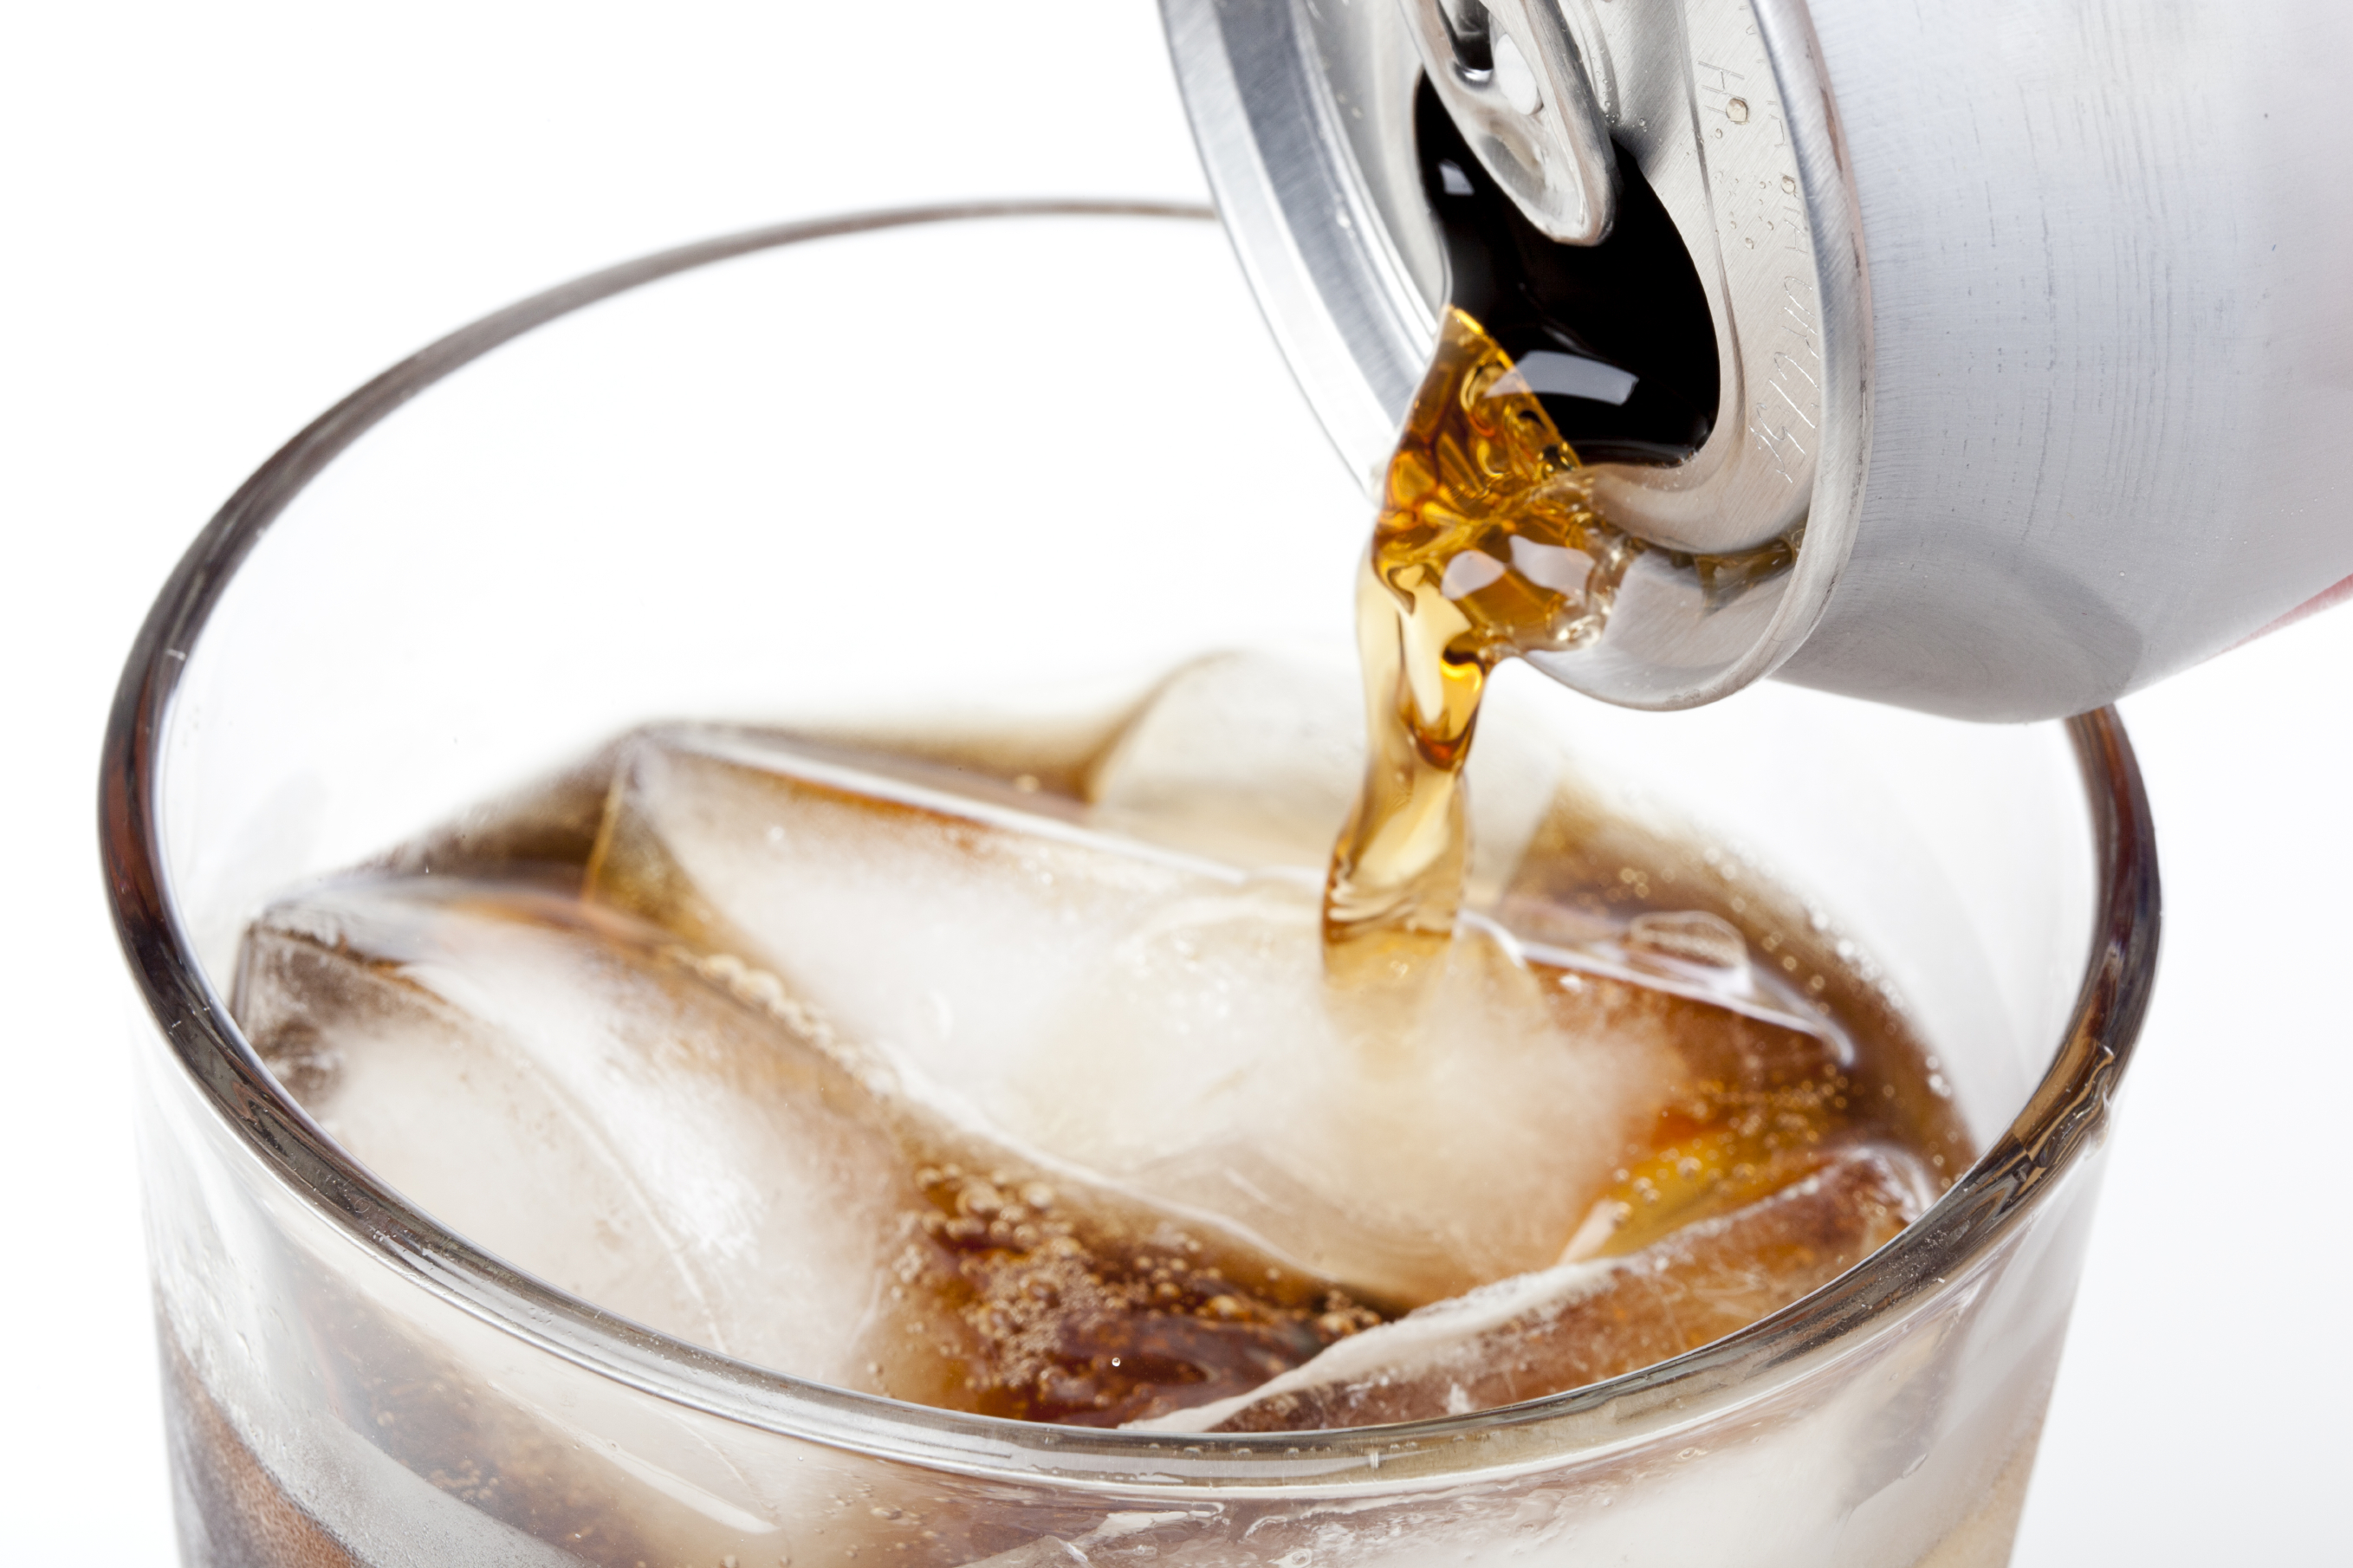 What are the long-term effects of drinking diet soda?